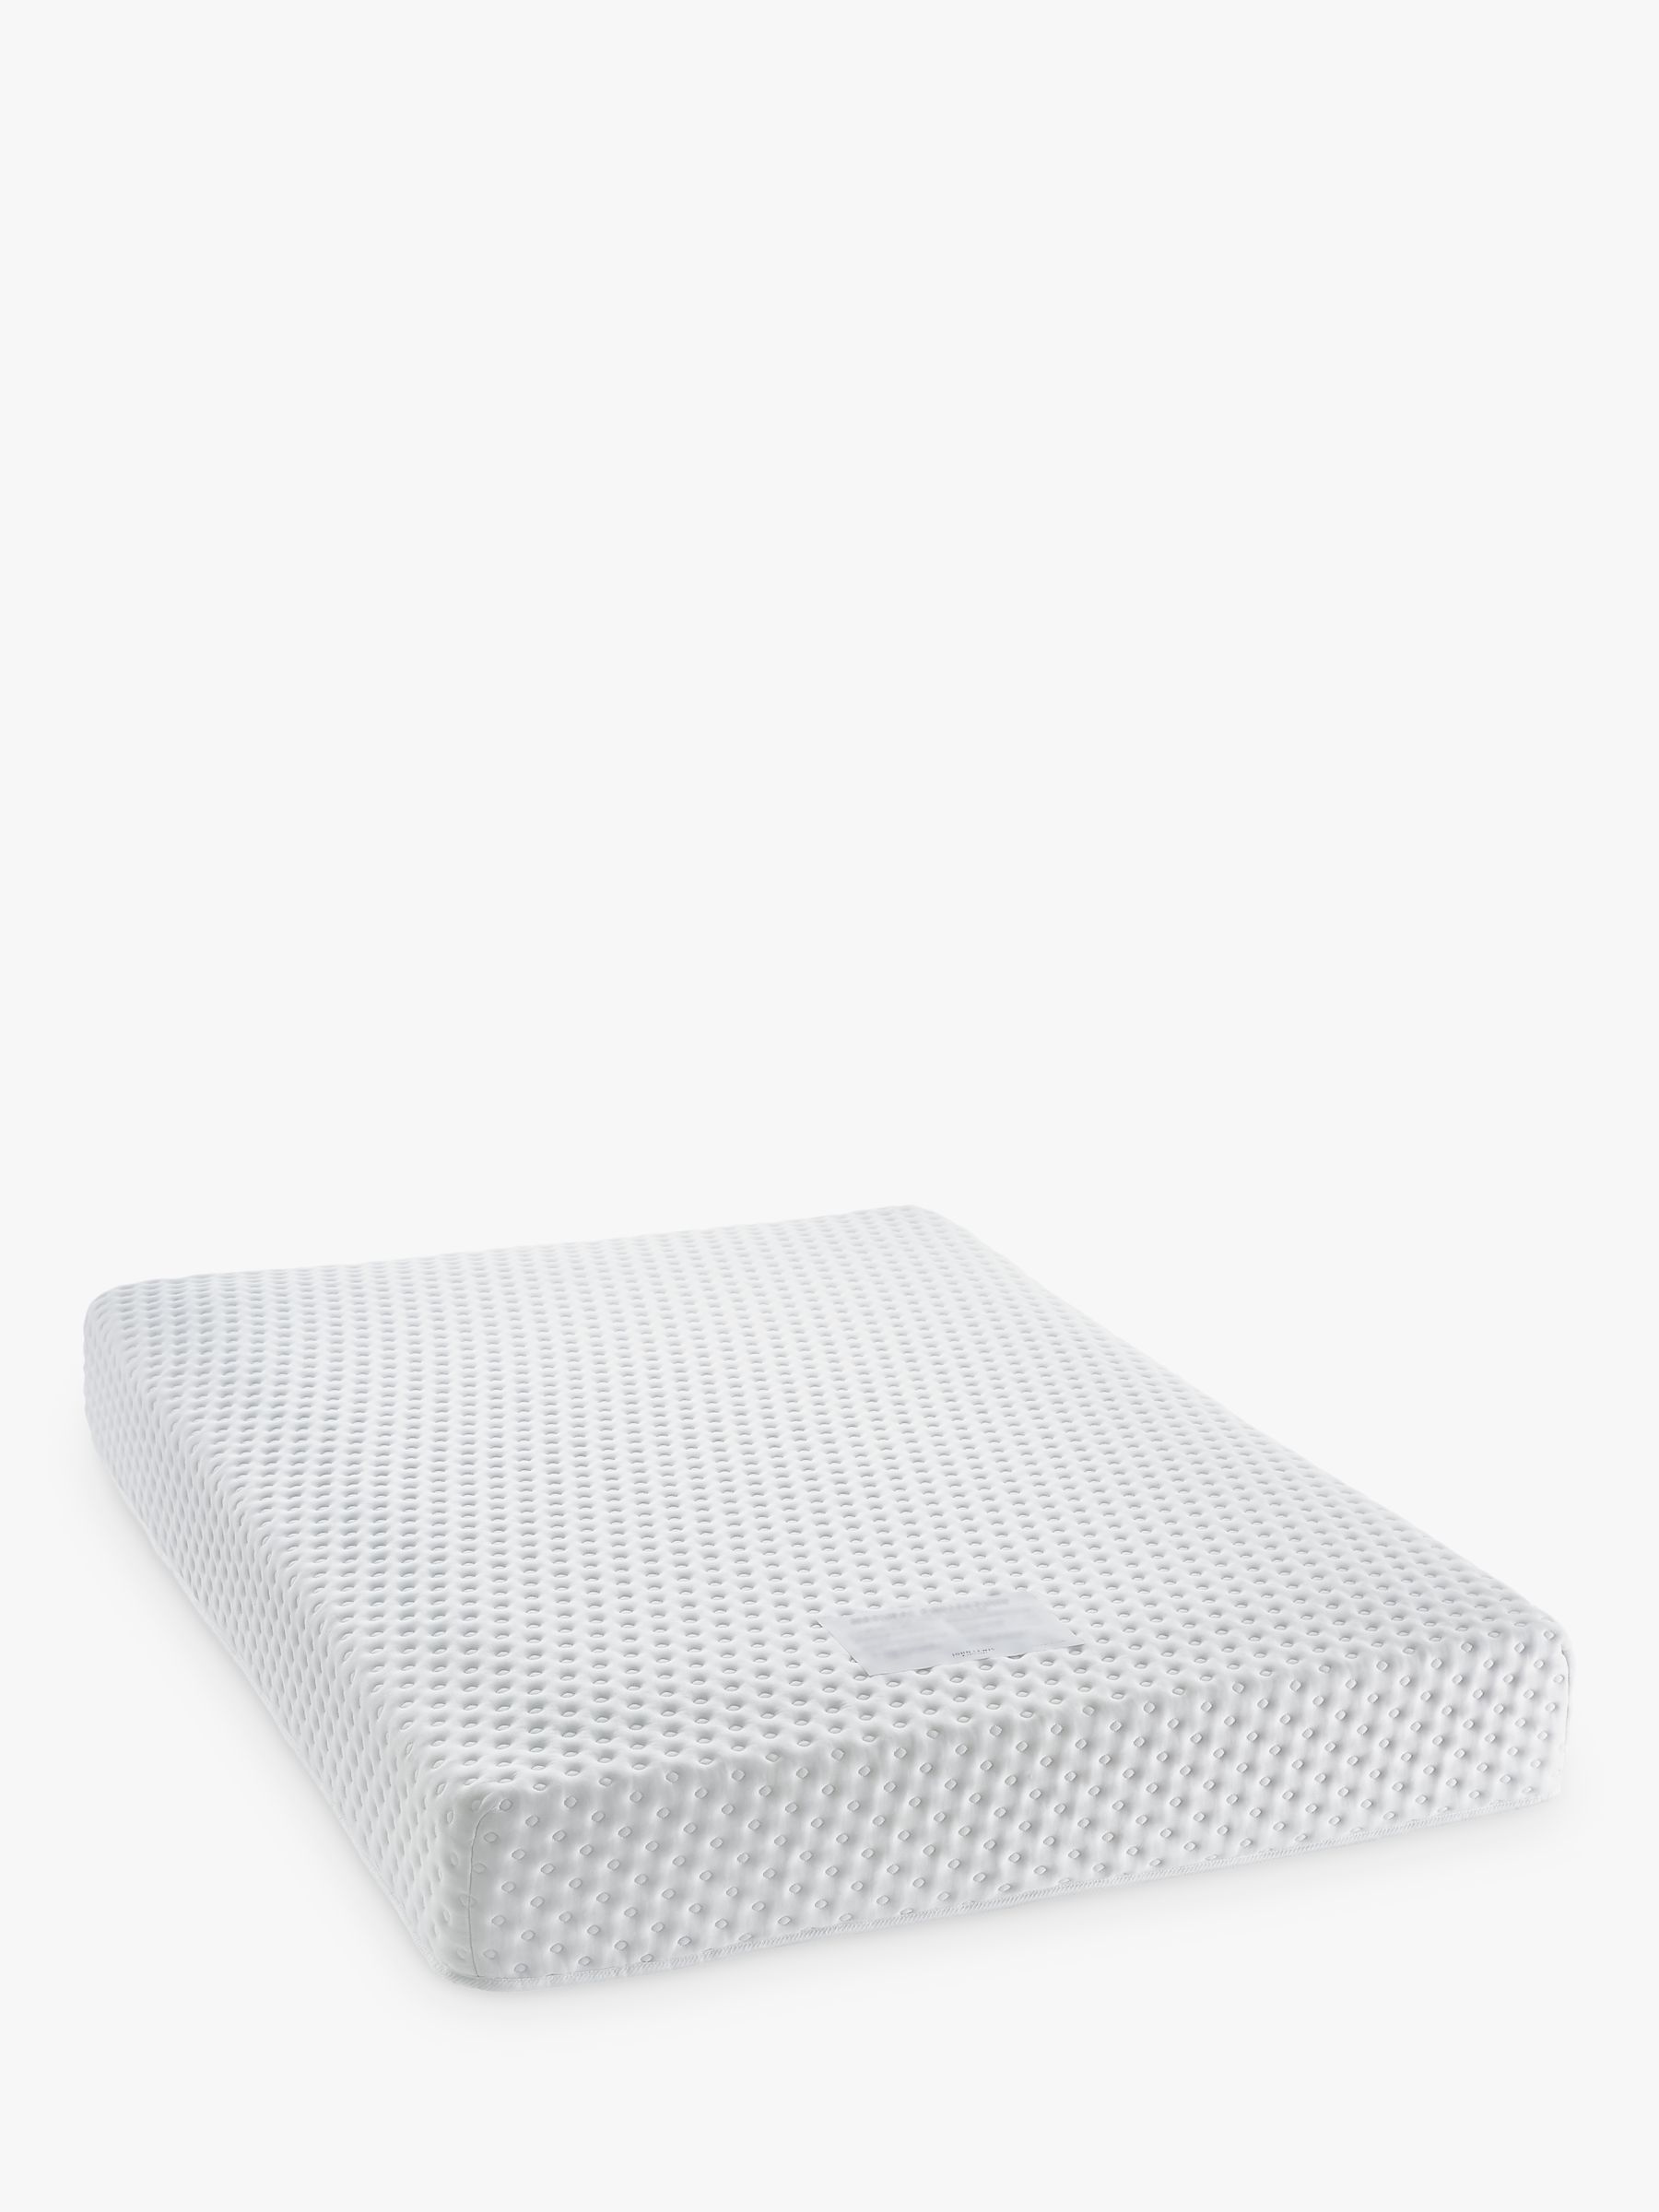 Photo of John lewis climate collection 1200 pocket spring mattress medium tension small double